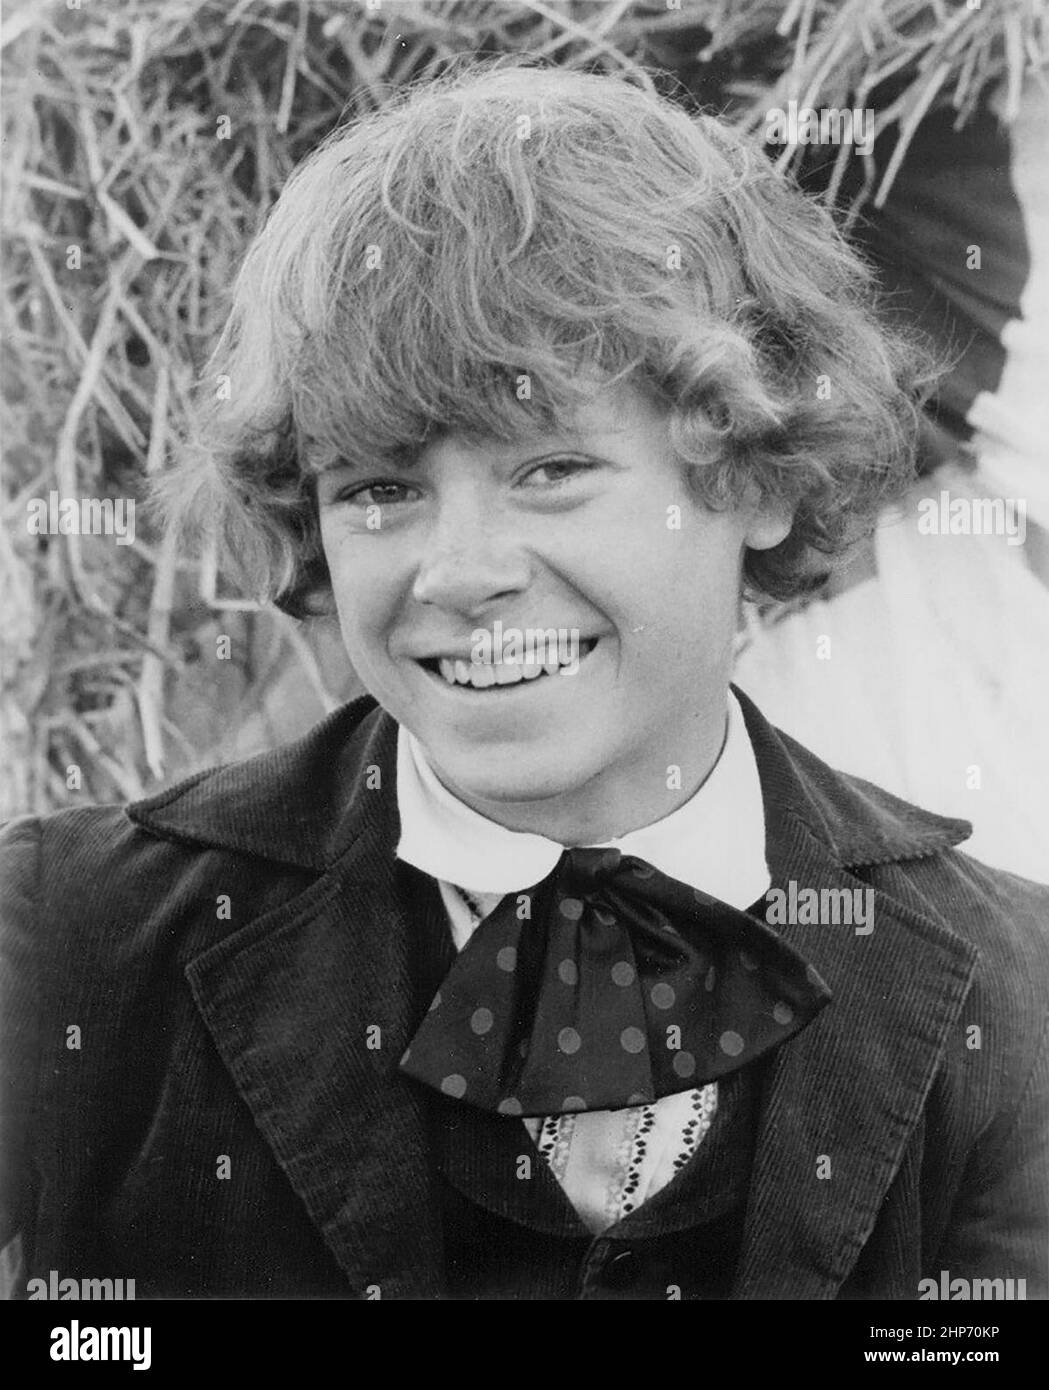 Publicity photo of American teen actor, Jeff East promoting his role as Huckleberry Finn in the United Artists feature films Tom Sawyer (1973) and Huckleberry Finn (1974) Stock Photo